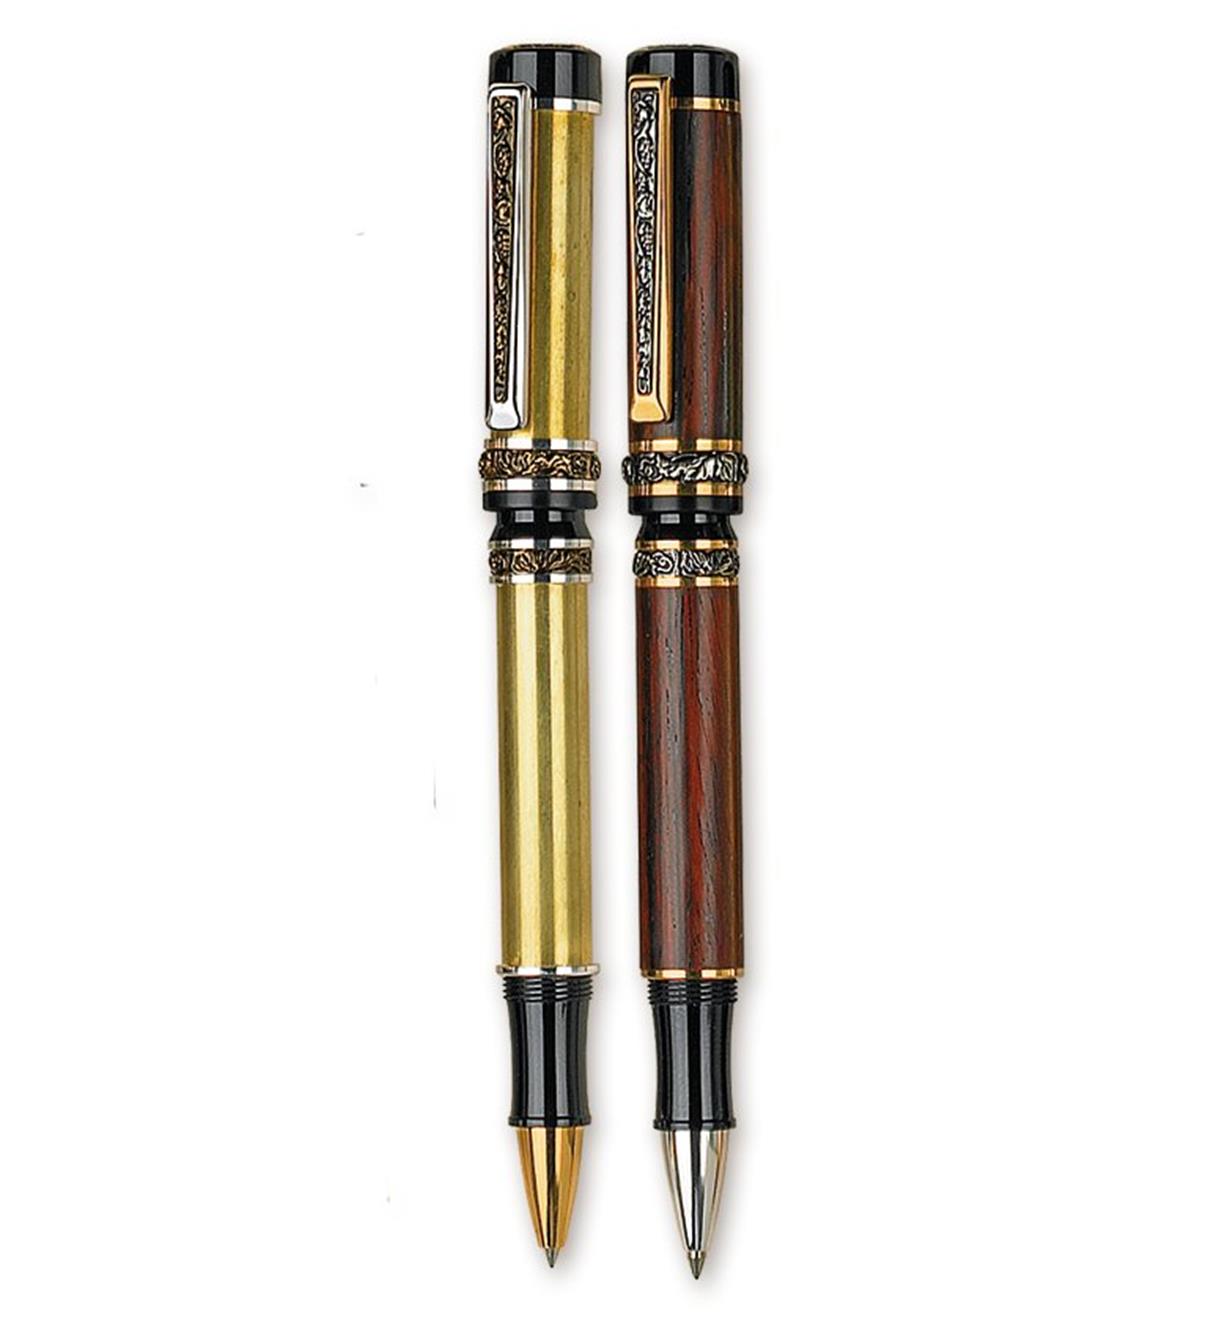 Example of completed Cambridge Rollerball Pen beside pen hardware